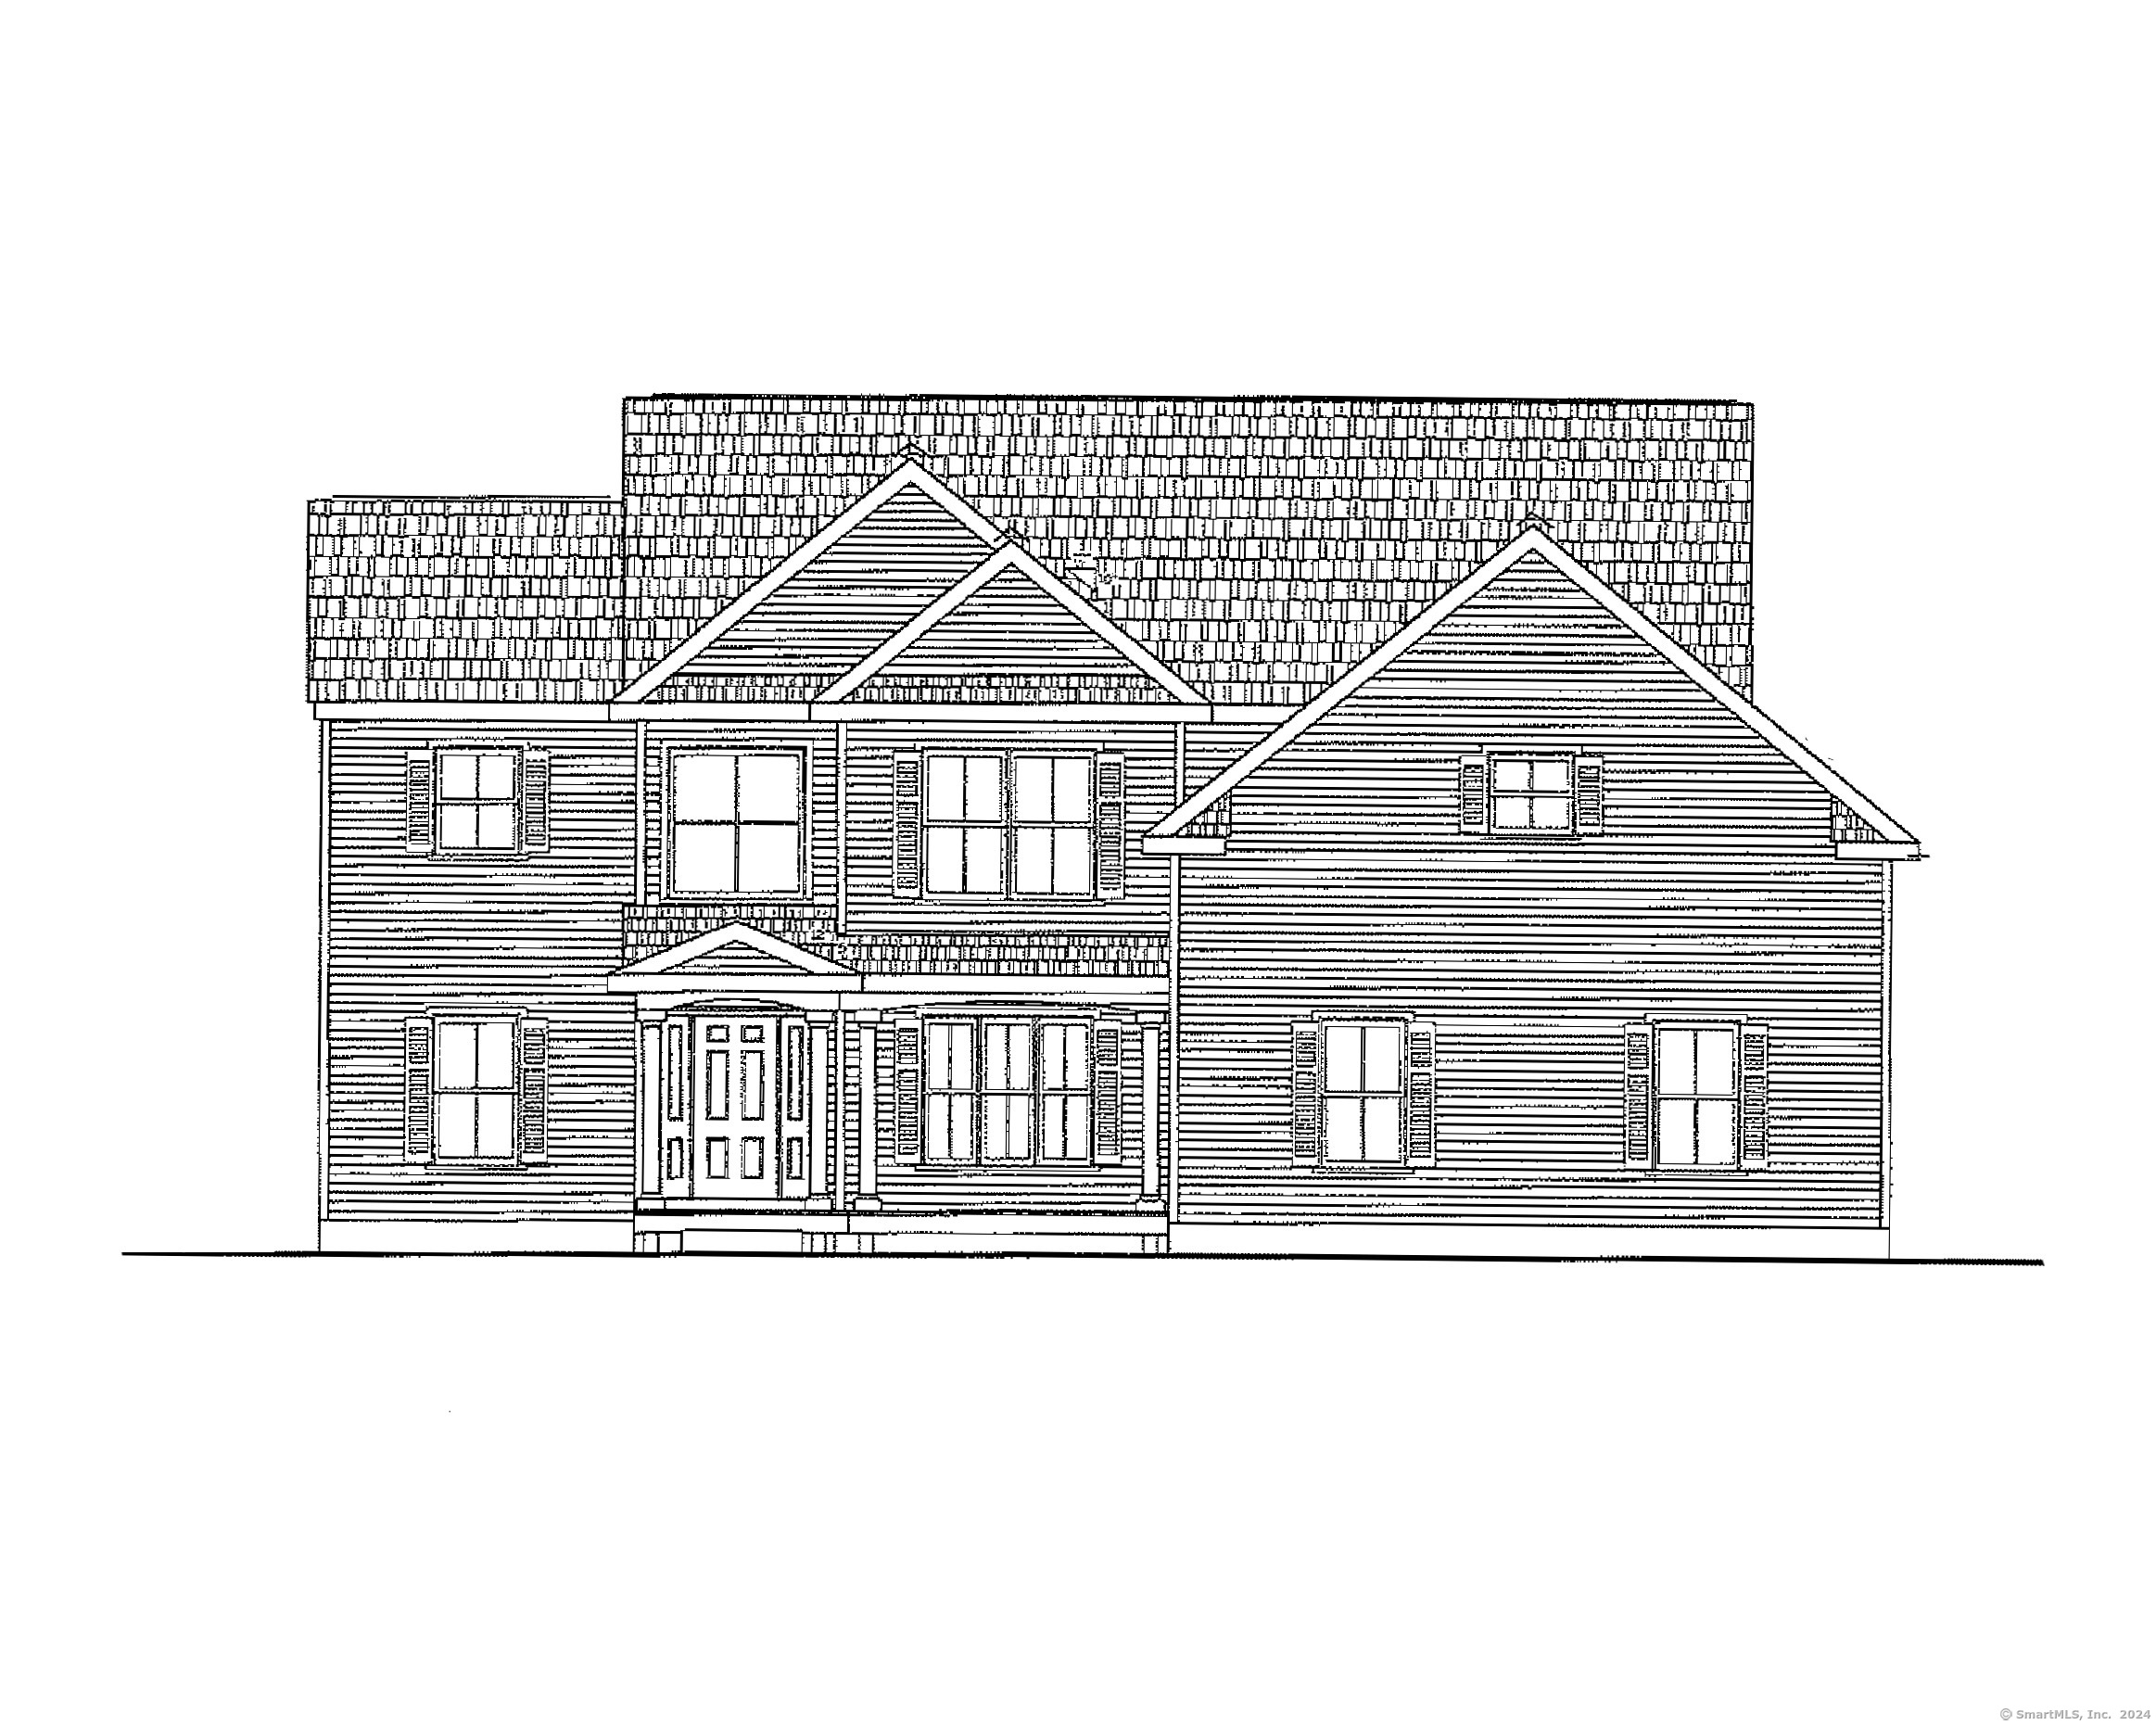 Property for Sale at Whispering Oaks  Lot 6 Court, Cheshire, Connecticut - Bedrooms: 4 
Bathrooms: 3 
Rooms: 8  - $826,000